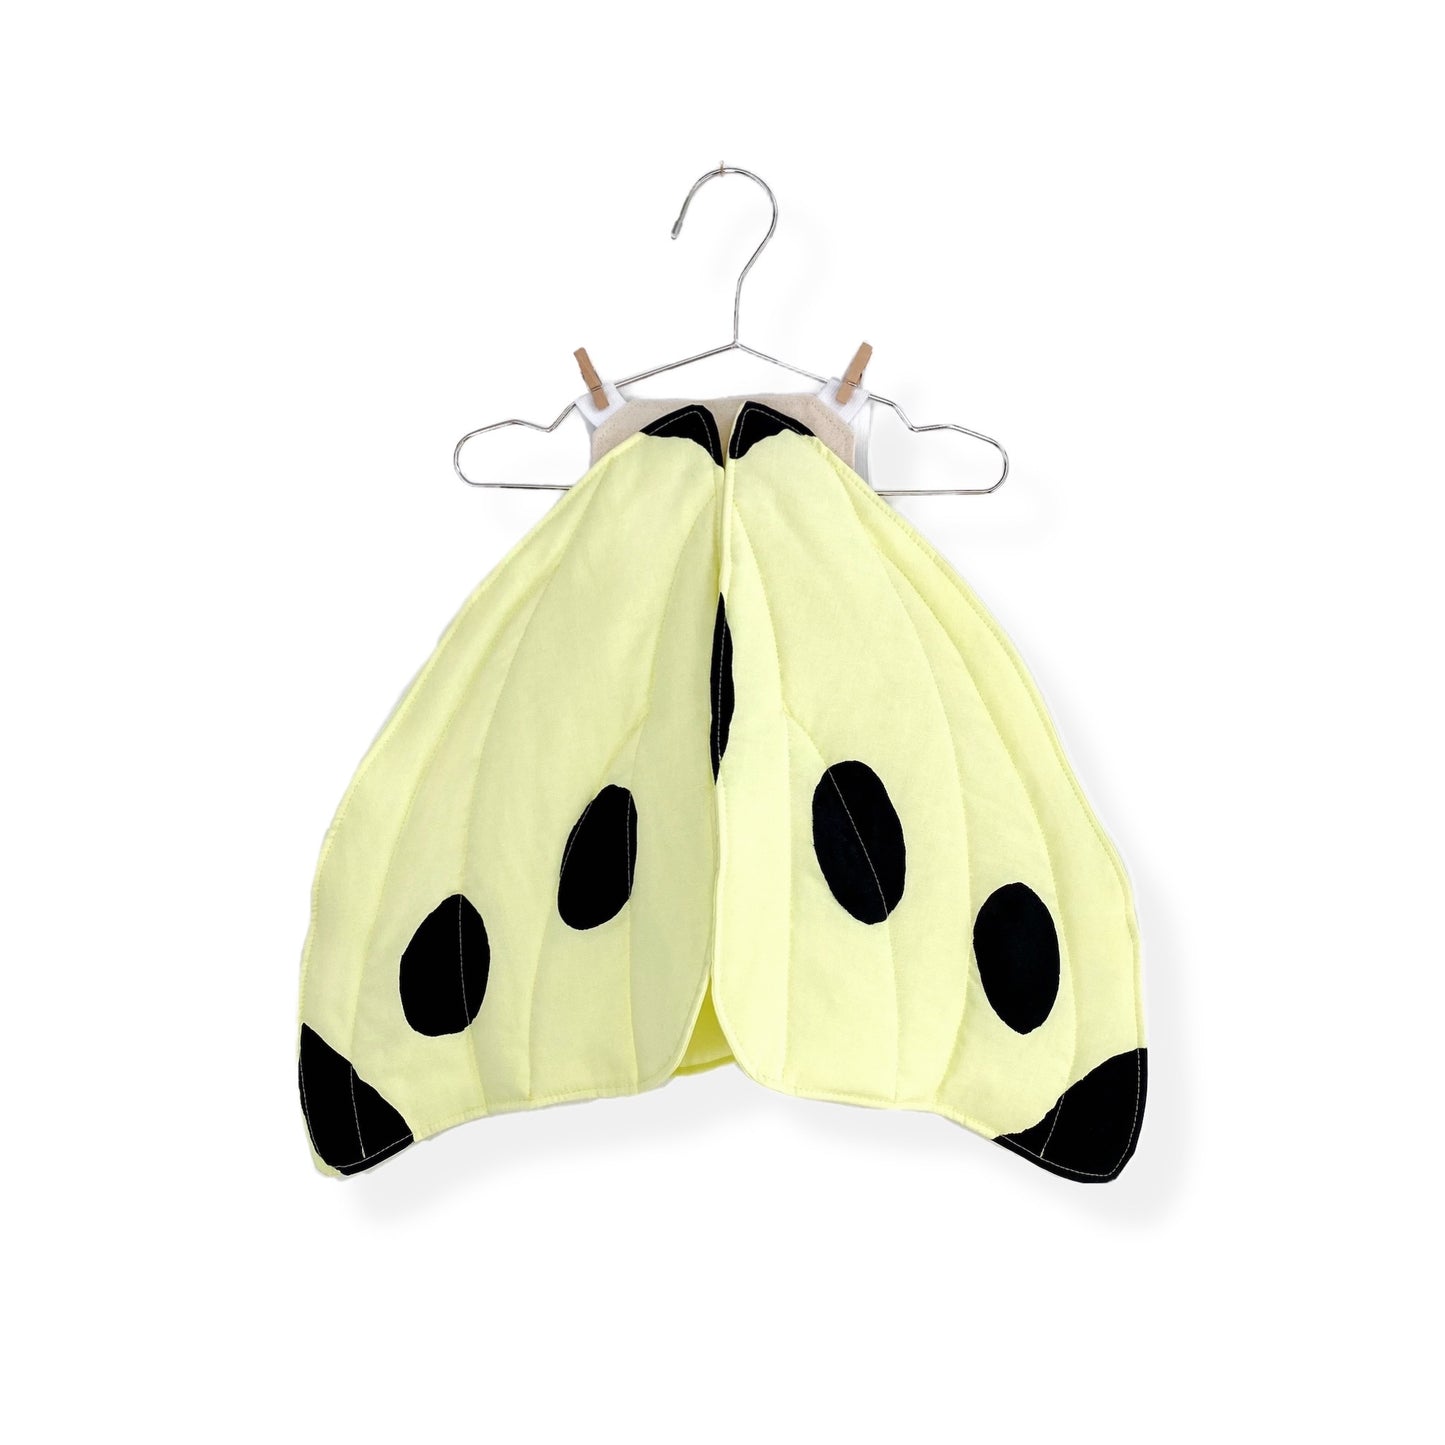 Yellow butterfly costume wings for toddlers and kids.